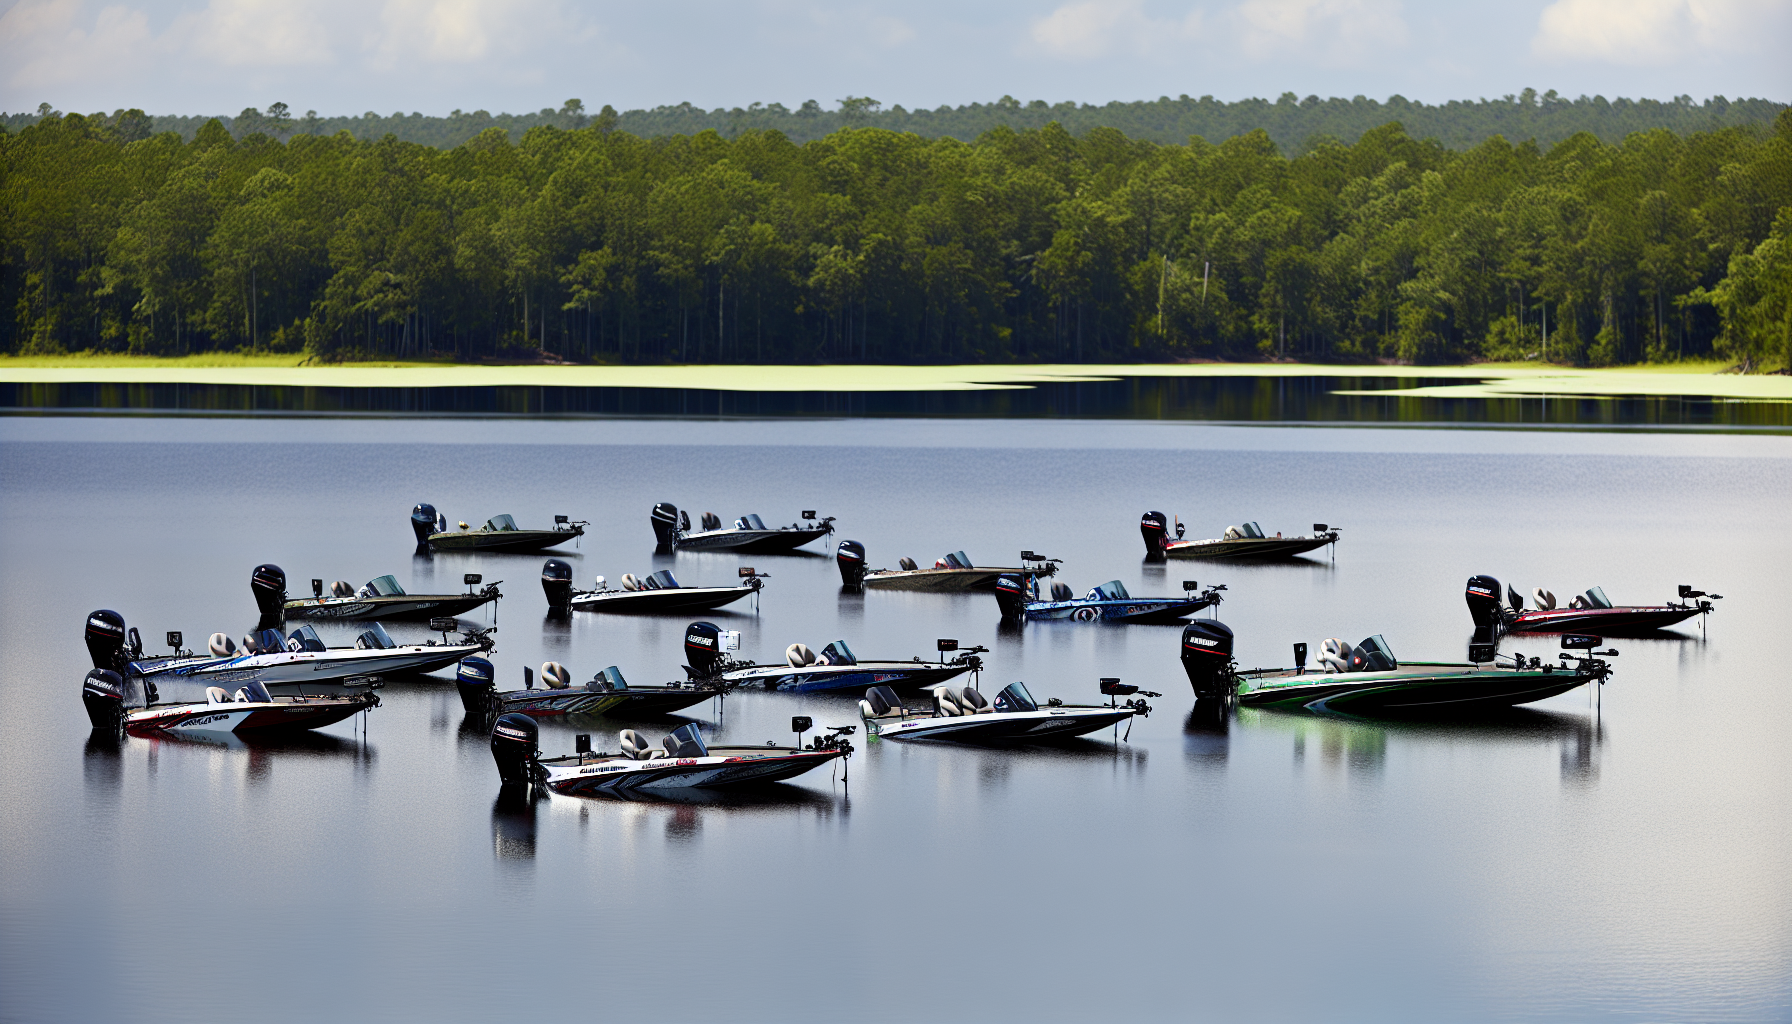 Selecting a bass boat